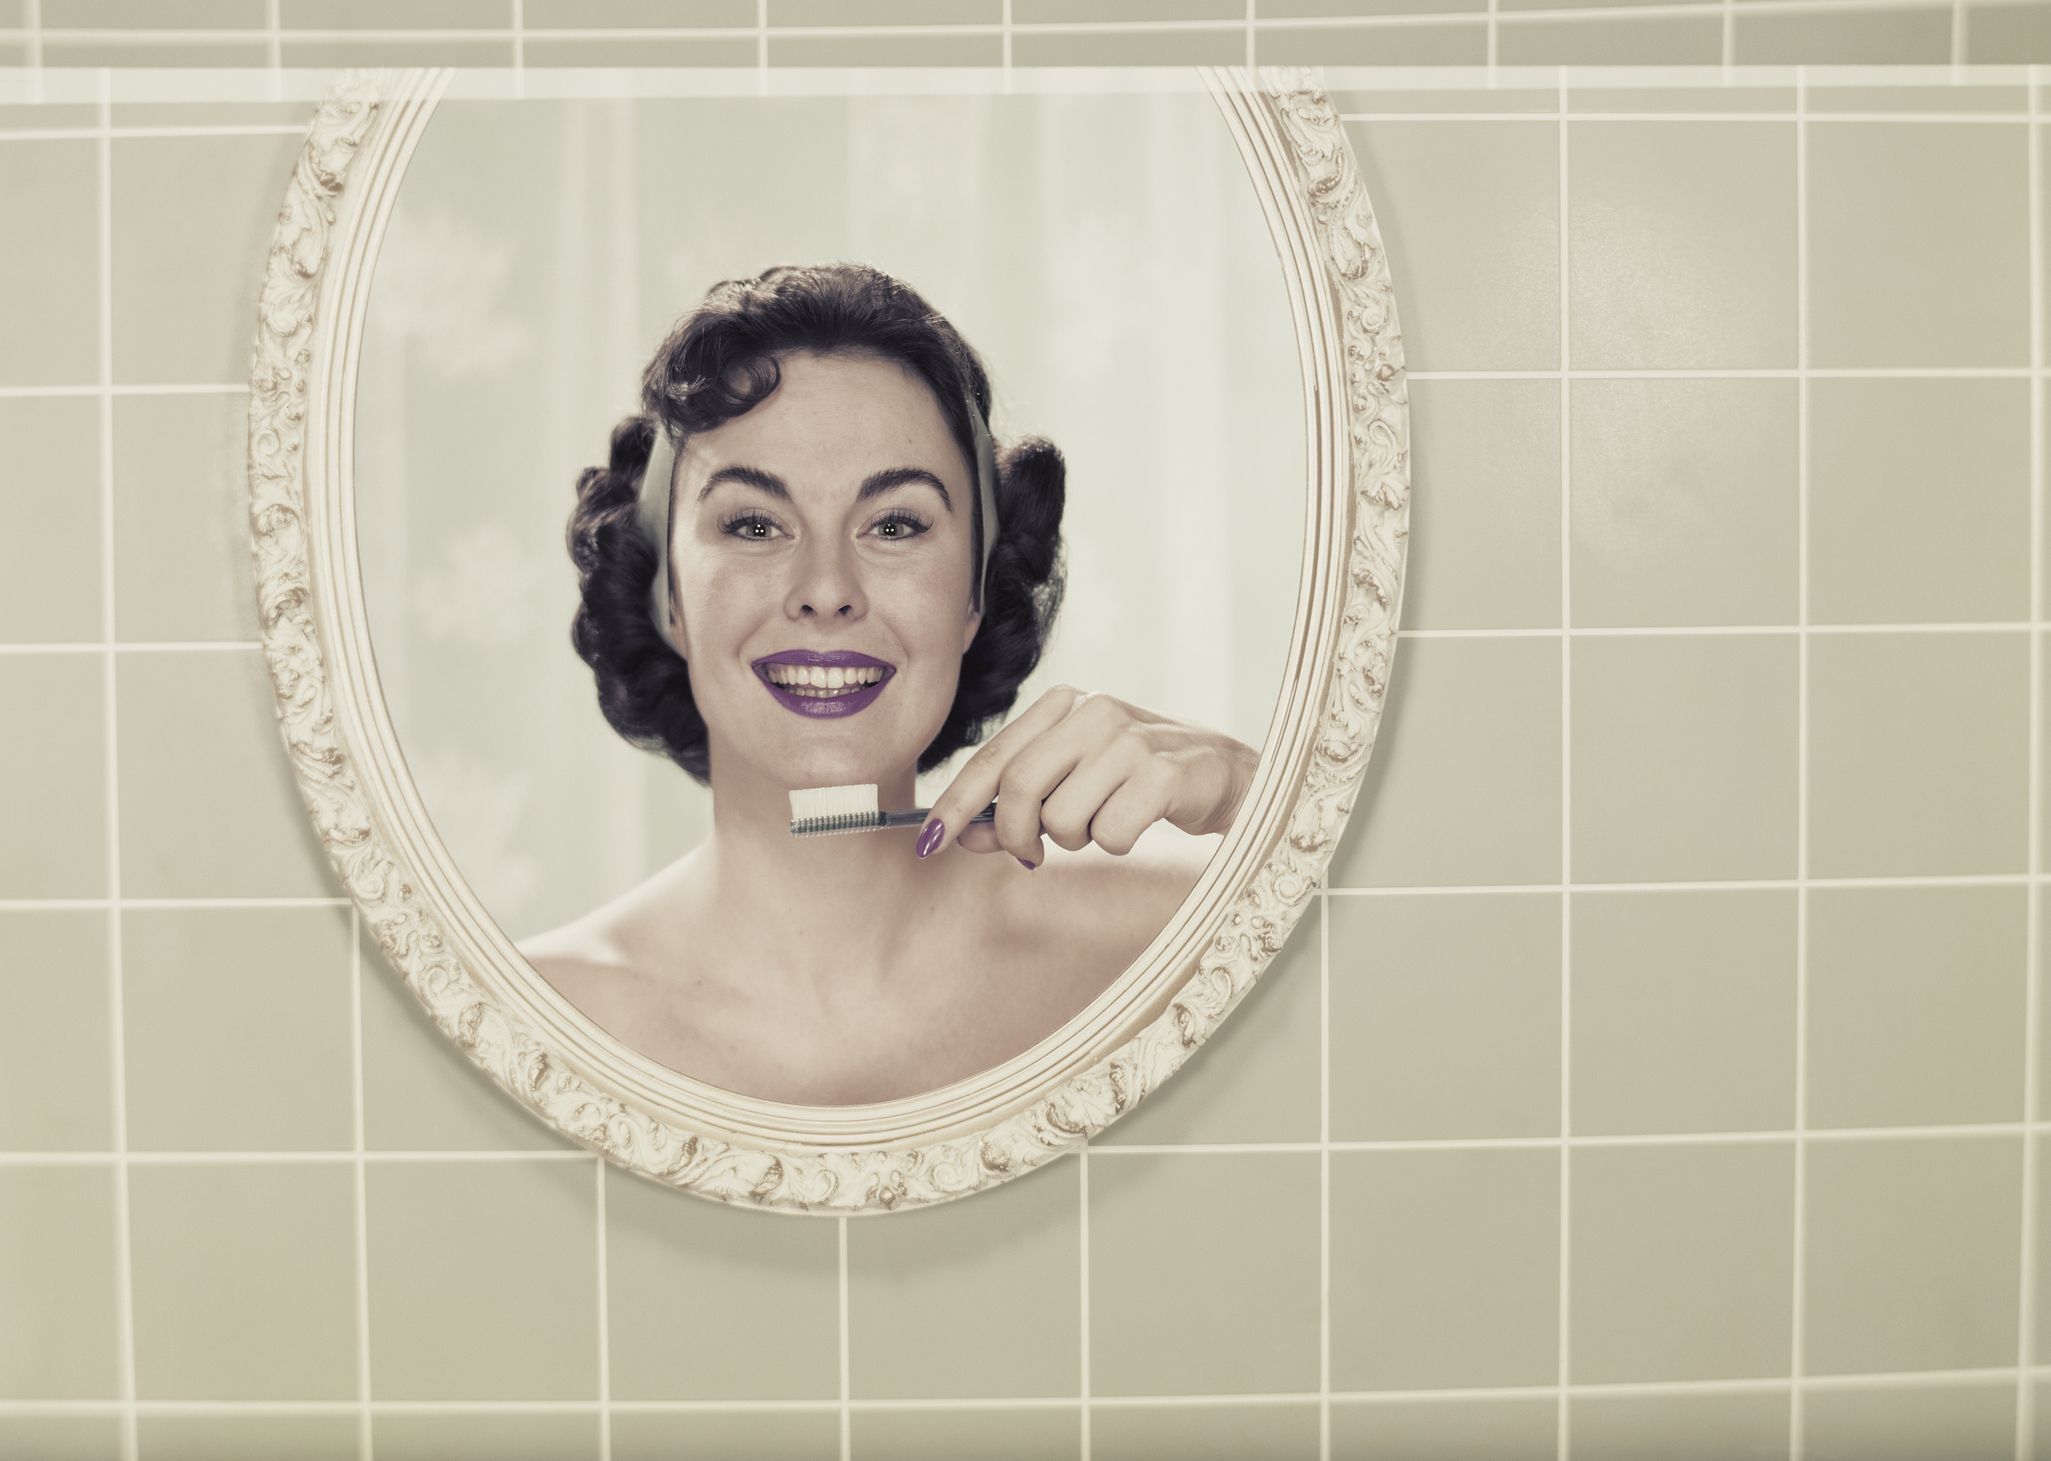 Young woman's reflection in mirror holding toothbrush, smiling, portrait